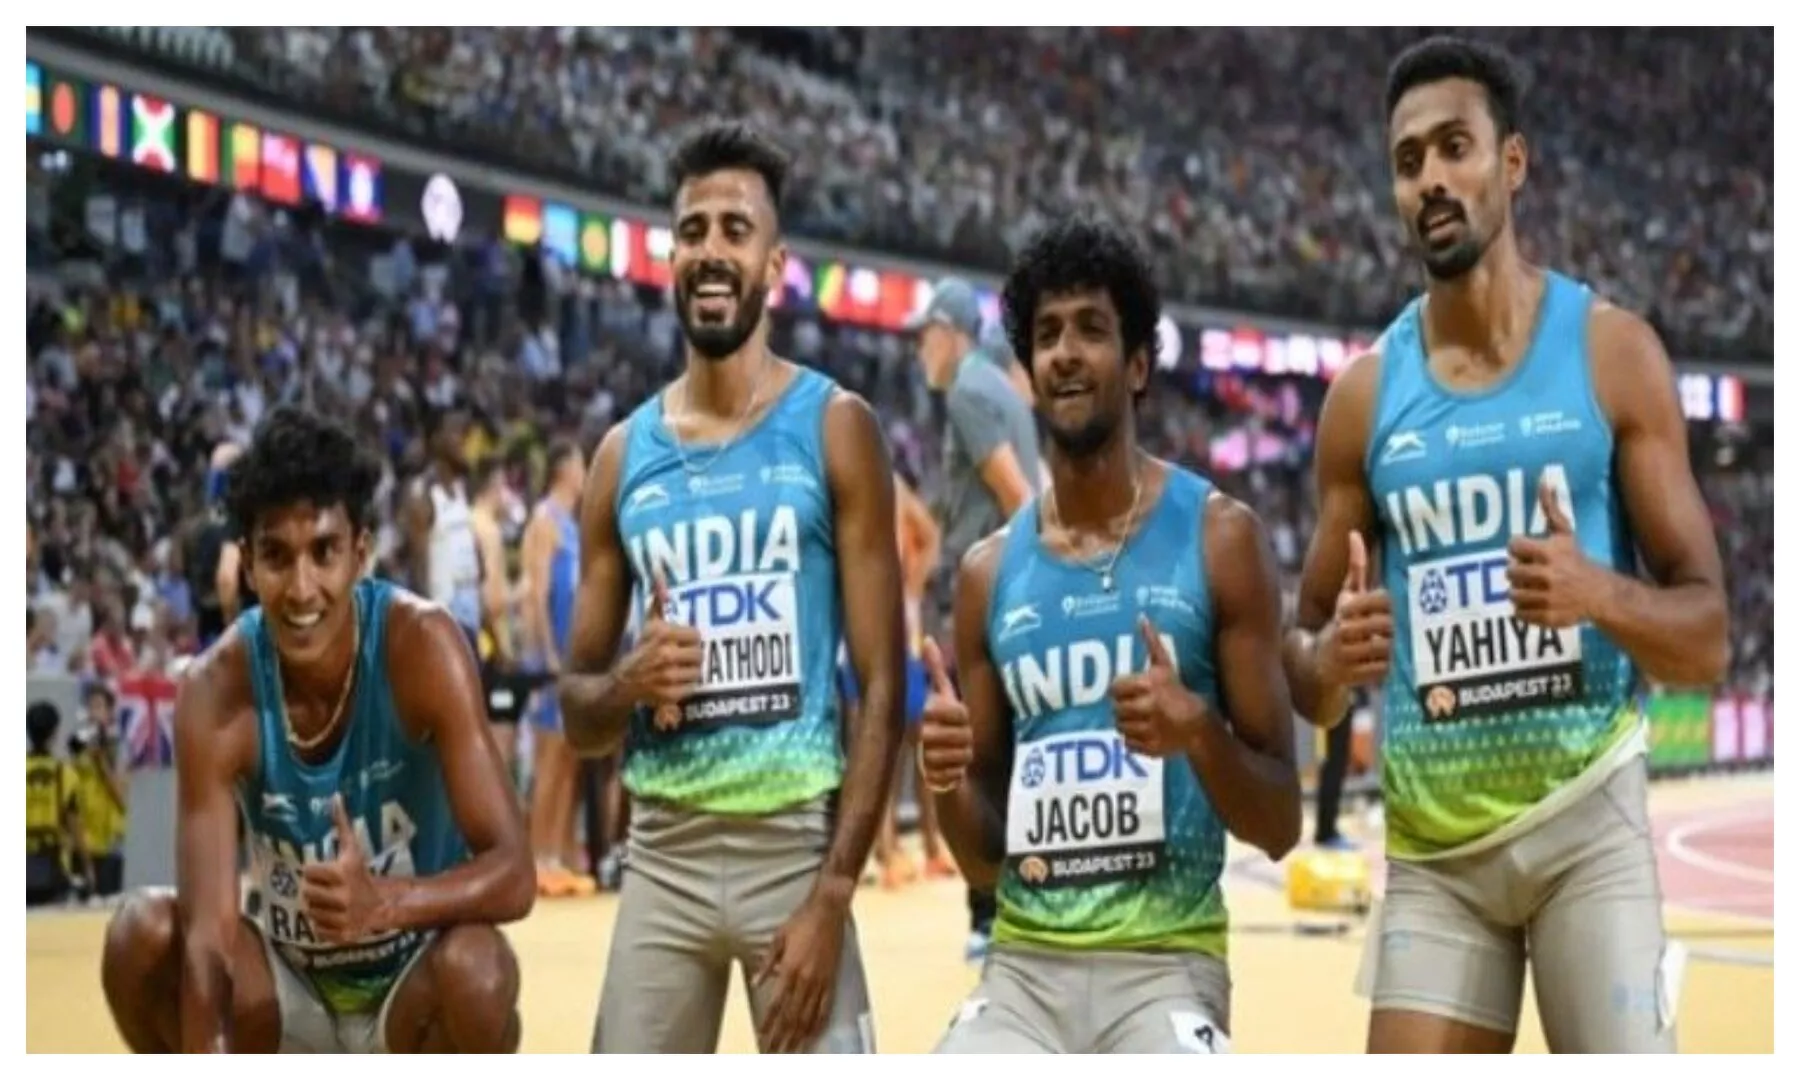 Opening up on tiniest things to each other, raising concerns and fixing mistakes: Anas on what makes Indian men's 4x400m relay team tick